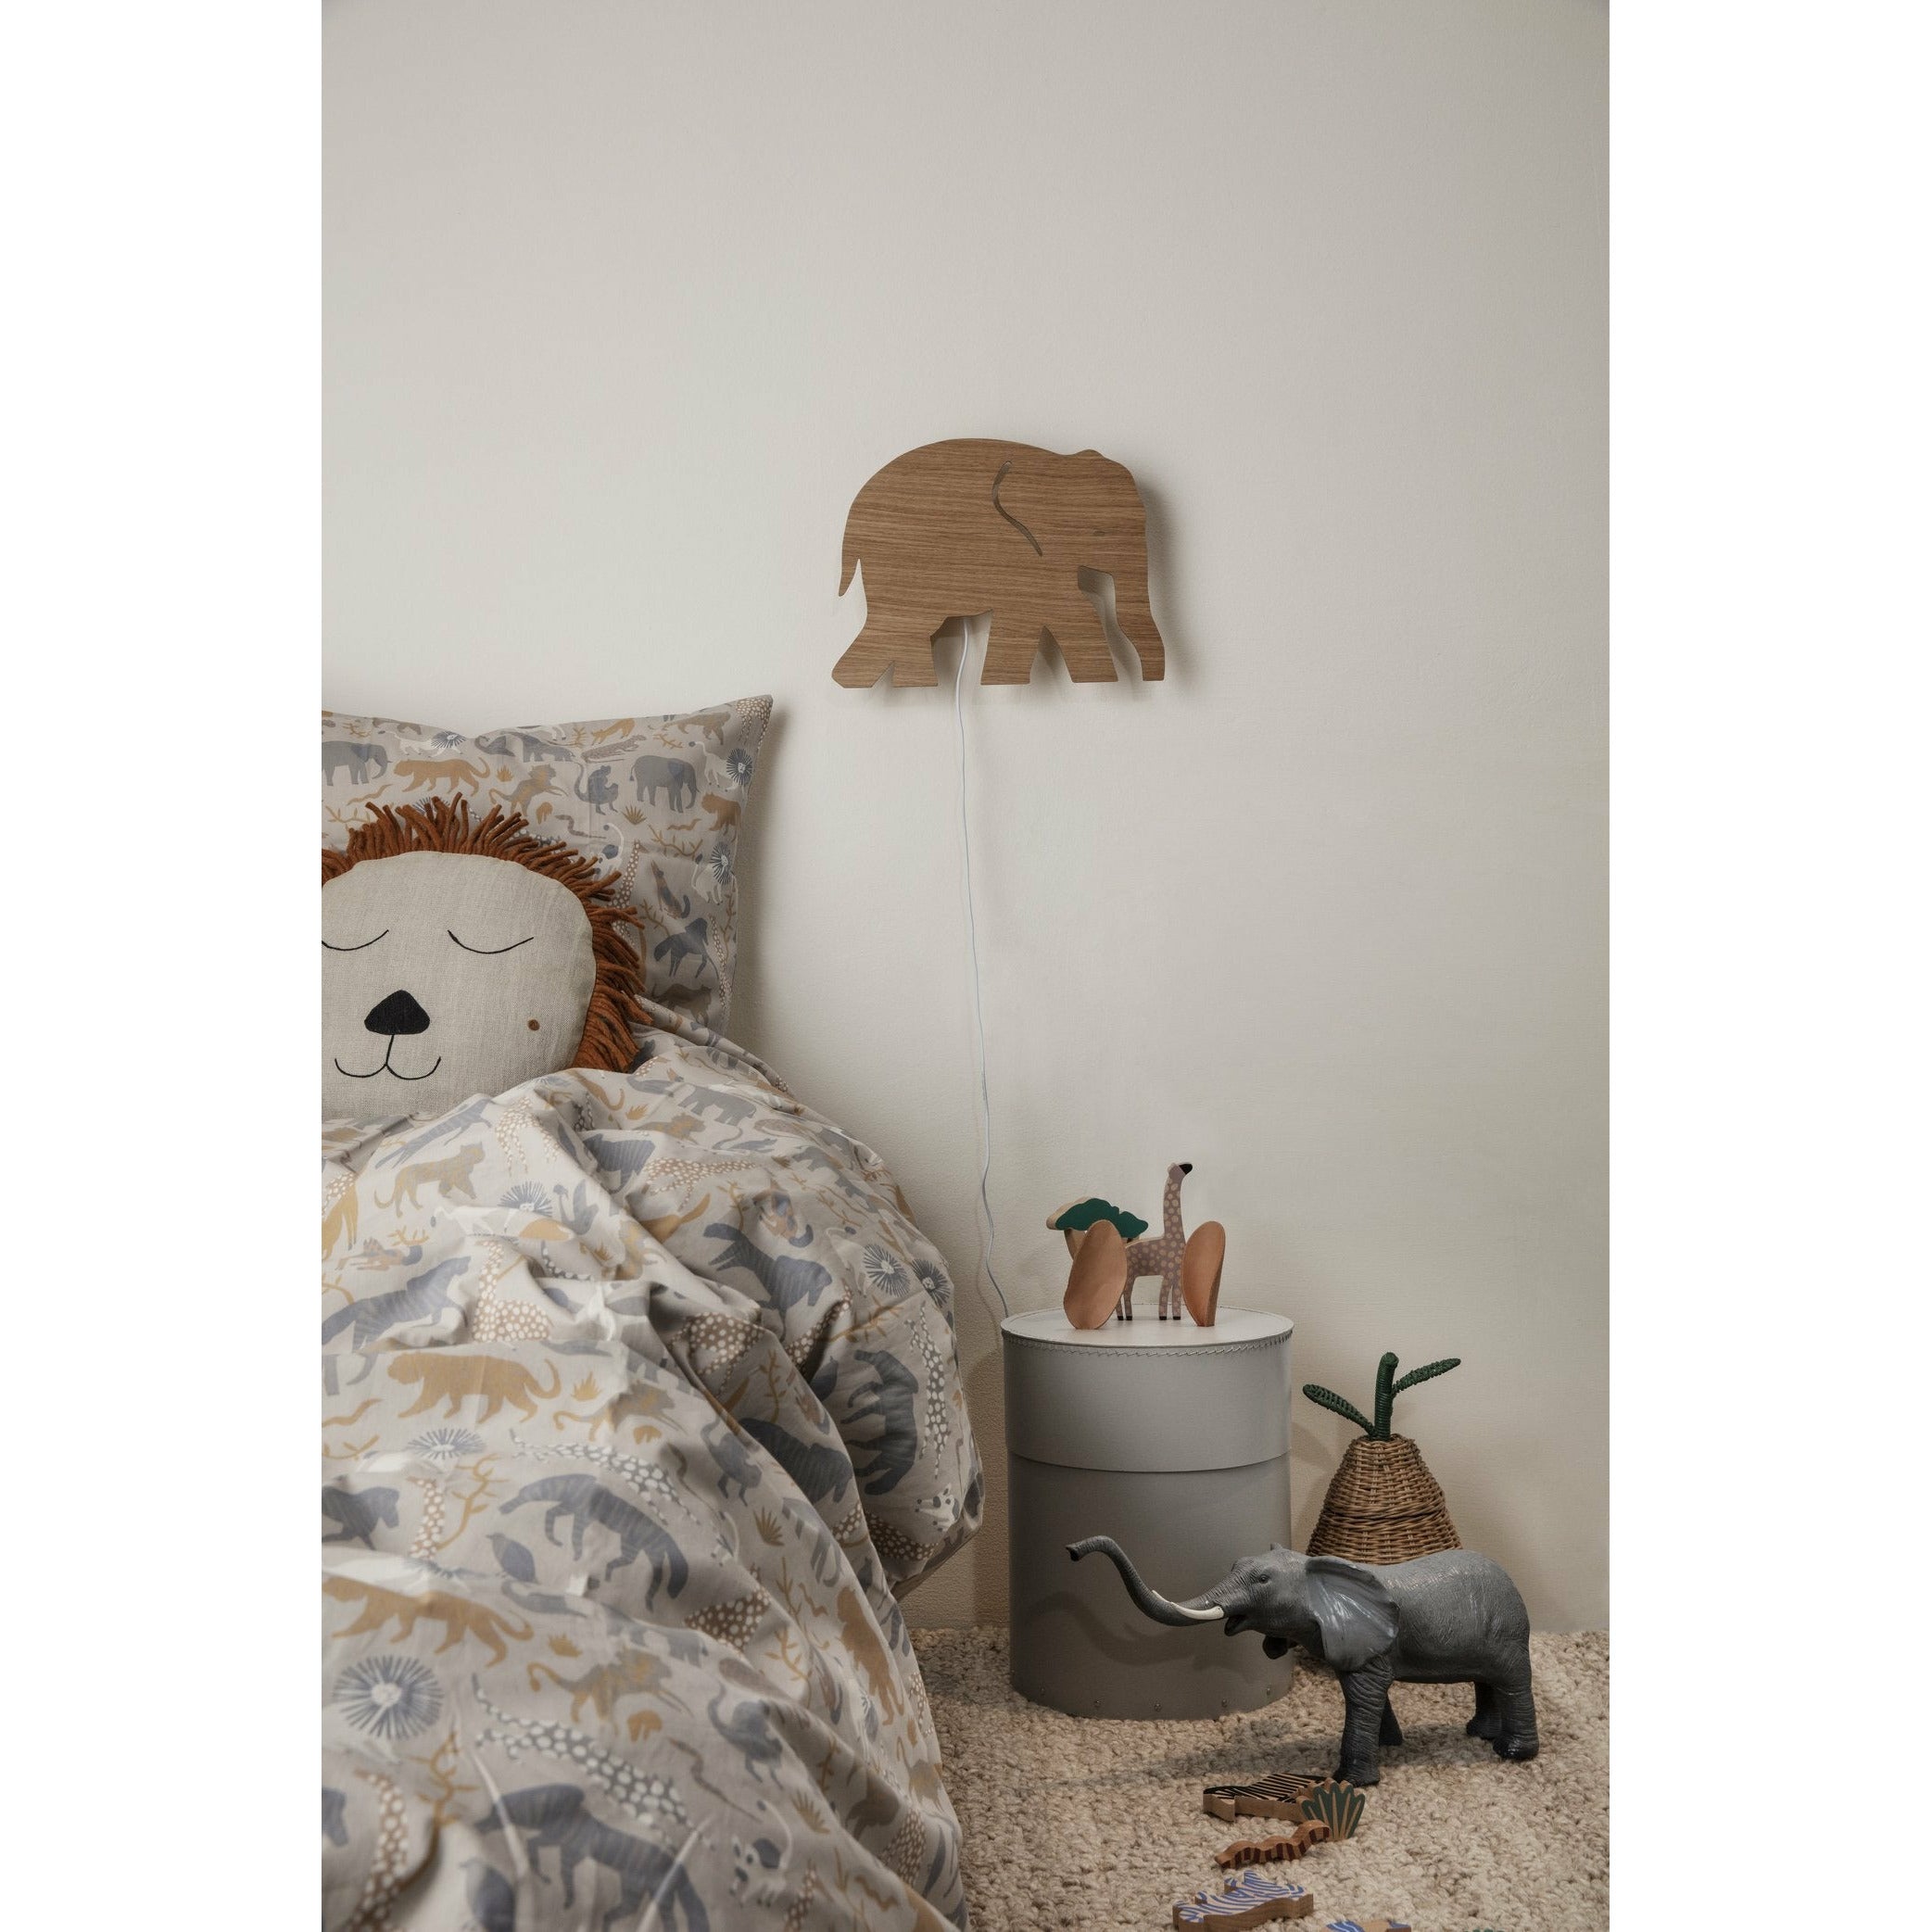 Ferm Living Dot Embroidery Sengesæt Offwhite, Baby